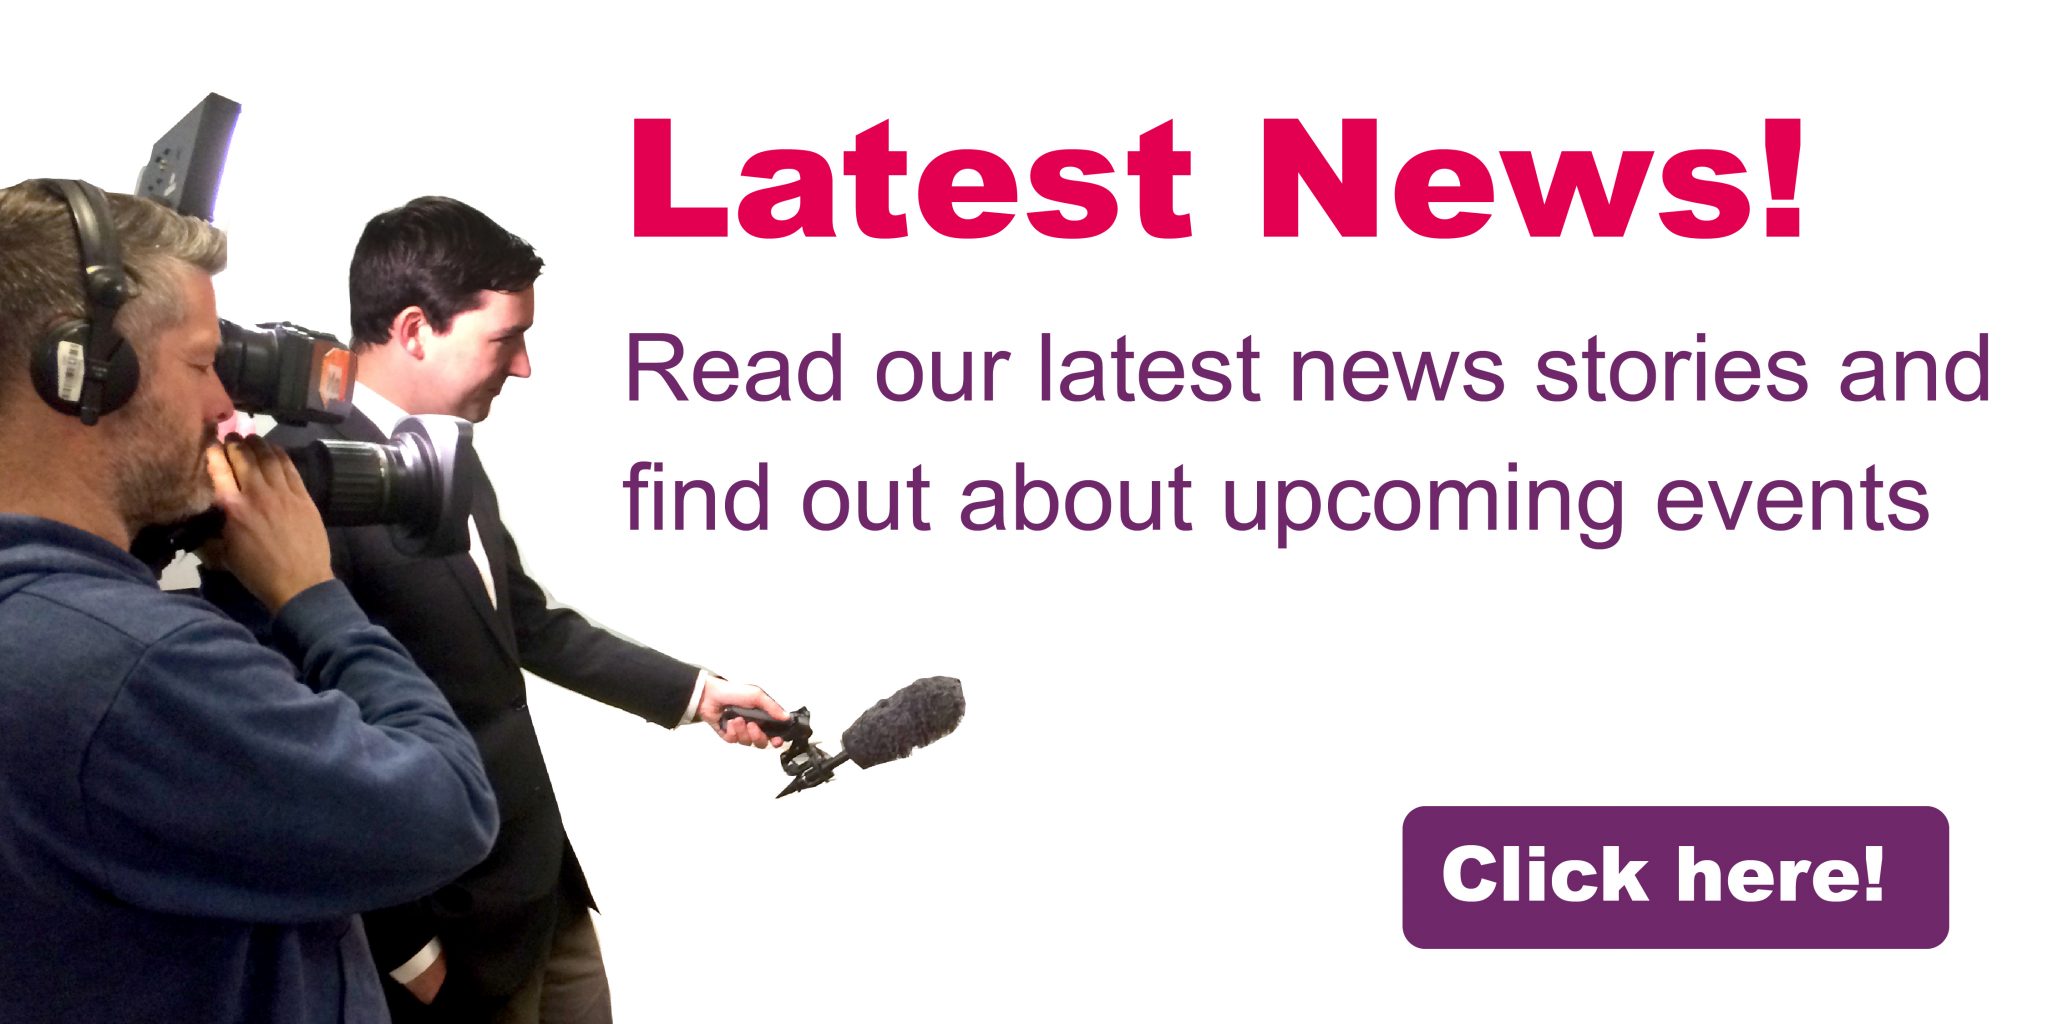 Latest News!  Read our latest news stories  and find out about upcoming events Click here!